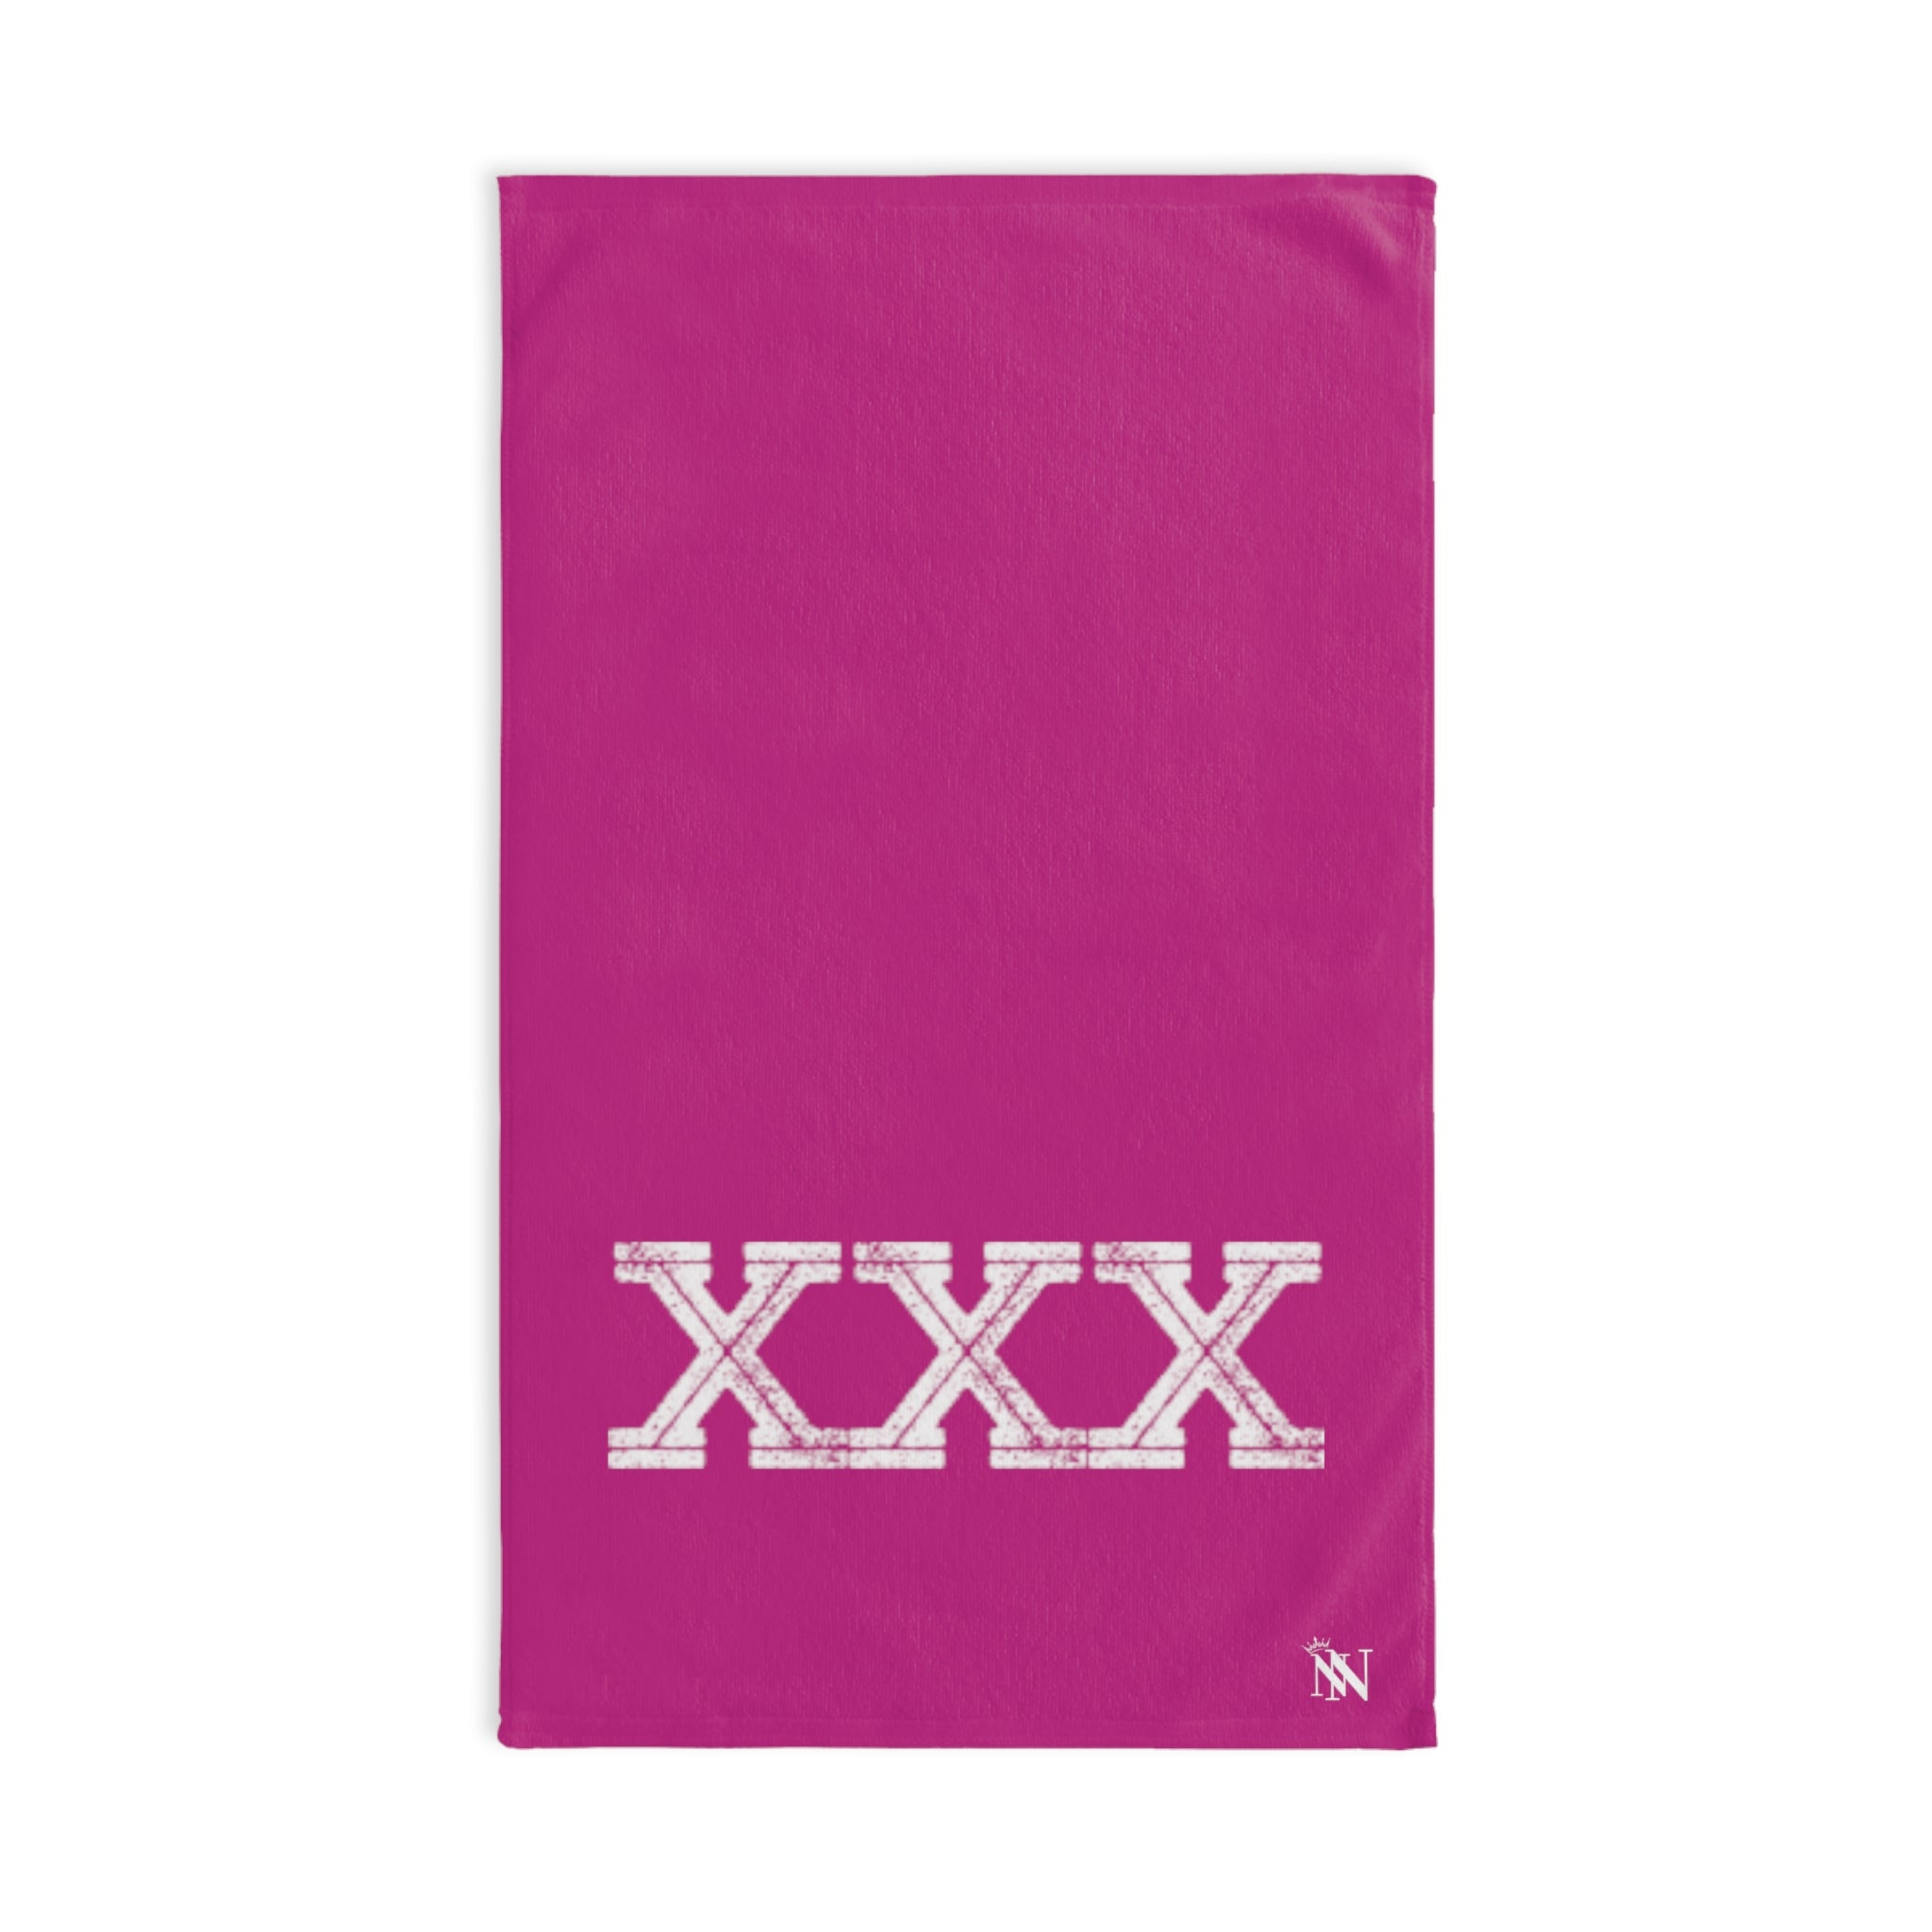 Triple XXX White Adult Fuscia | Funny Gifts for Men - Gifts for Him - Birthday Gifts for Men, Him, Husband, Boyfriend, New Couple Gifts, Fathers & Valentines Day Gifts, Hand Towels NECTAR NAPKINS